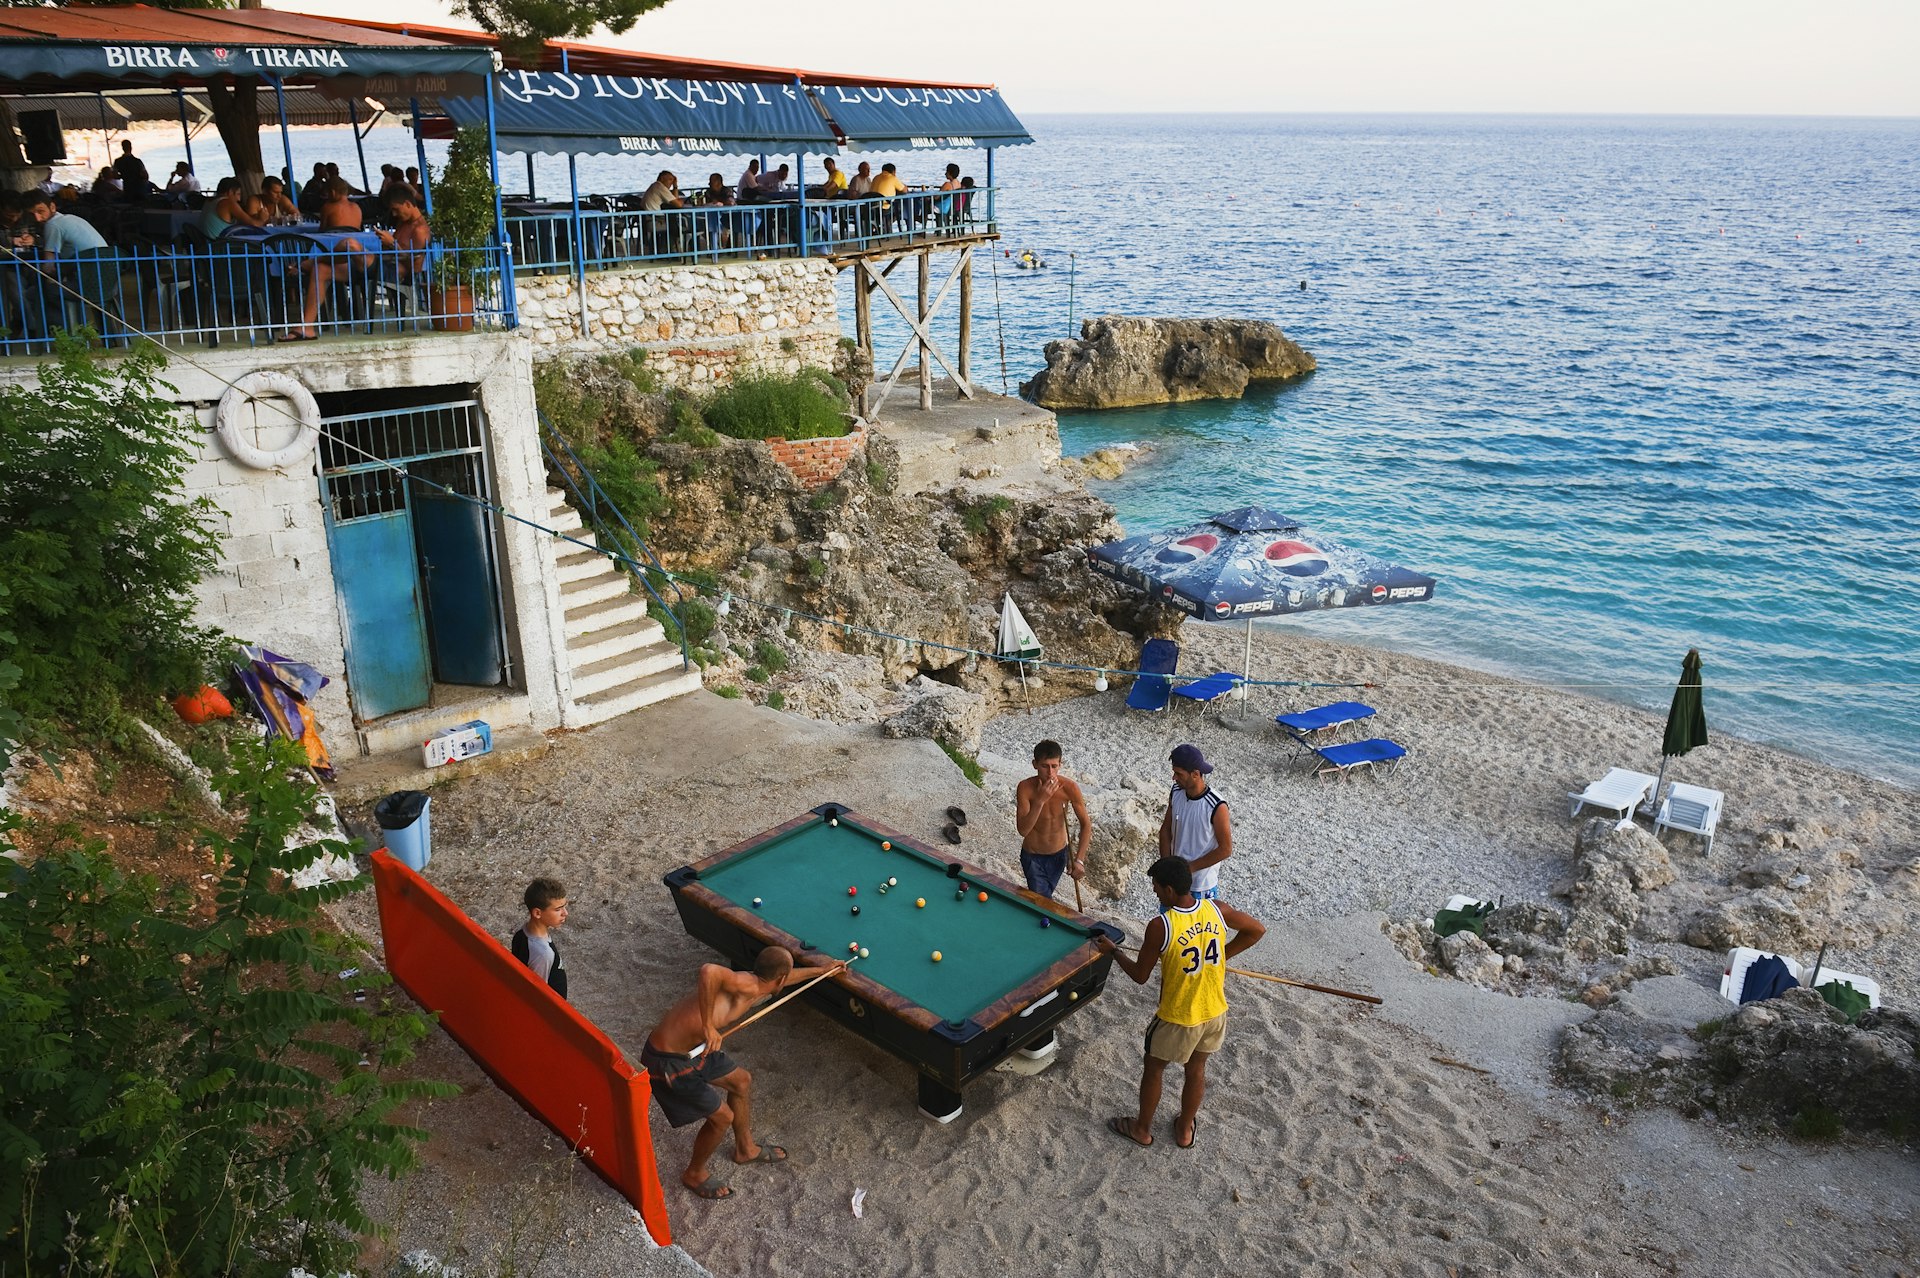 People enjoy time on the beach, play snooker or having good food in the reataurant 